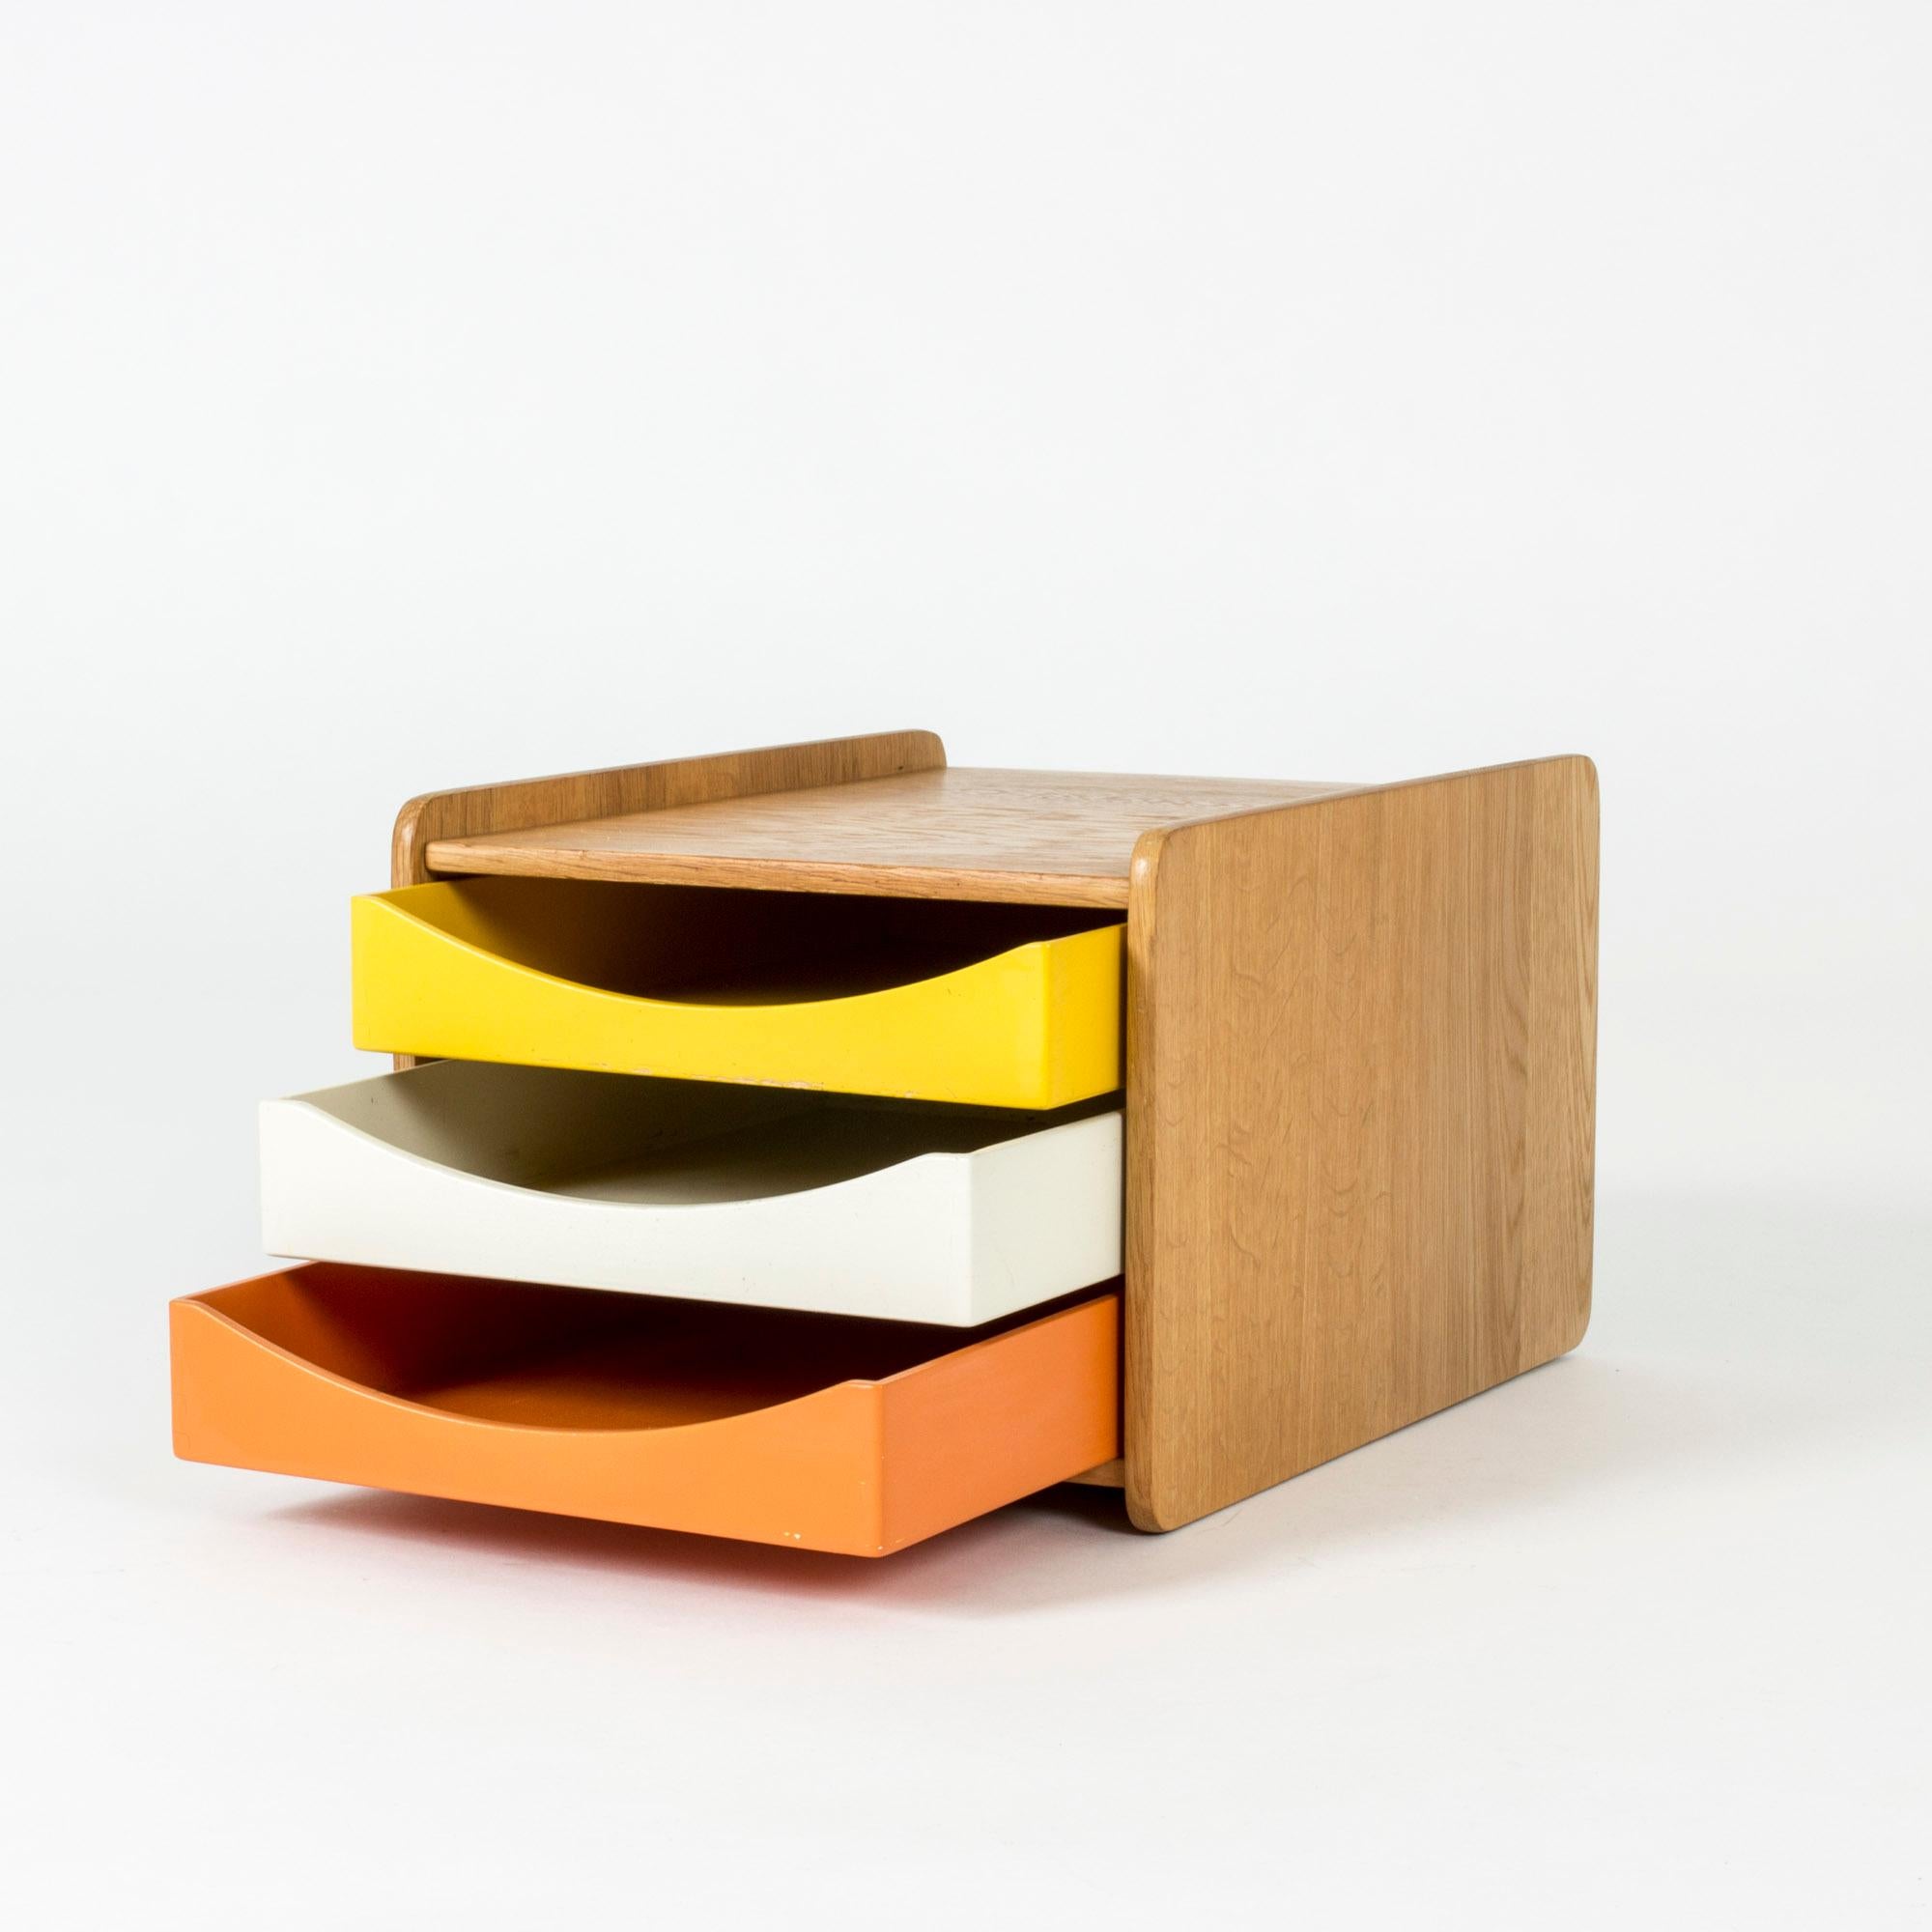 Lovely desk organizer by Børge Mogensen, made from oak with yellow, orange and white lacquered drawers. The drawers fit A4 size magazines and documents.